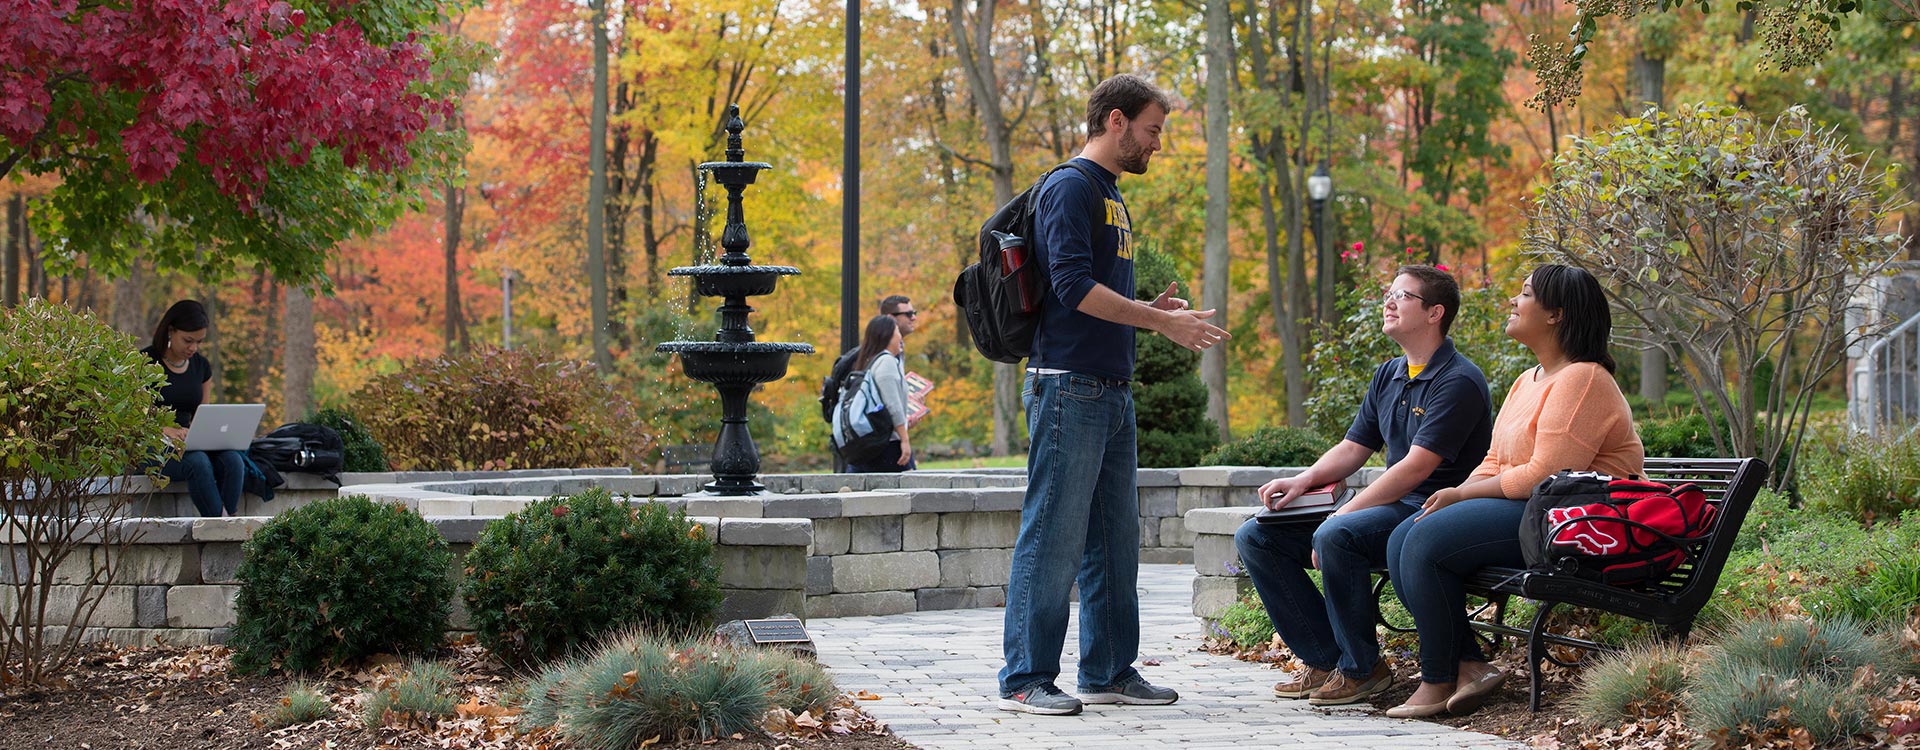 Three students conversing in a park